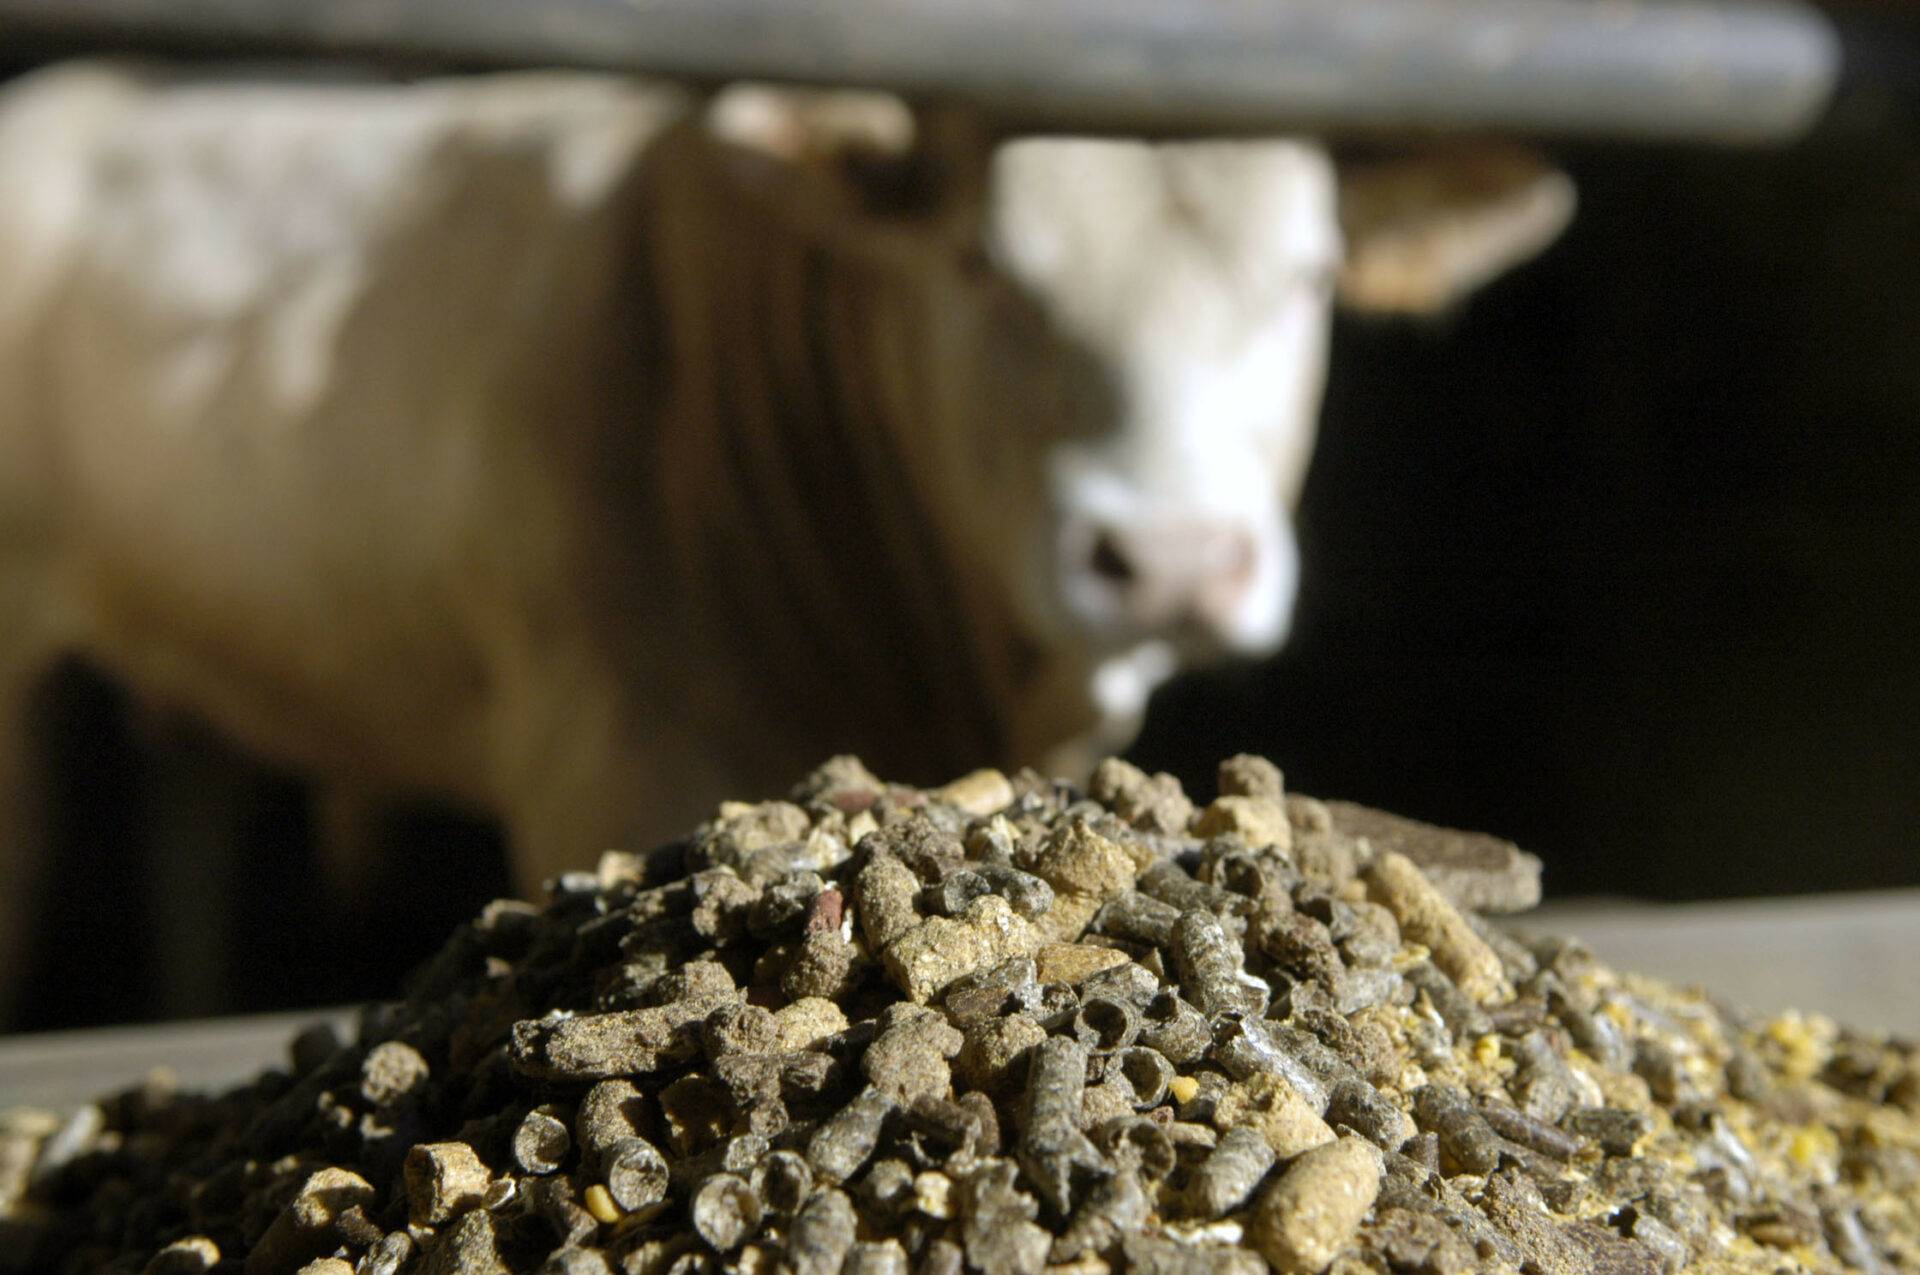 Report on the World’s Largest Animal Feed Companies